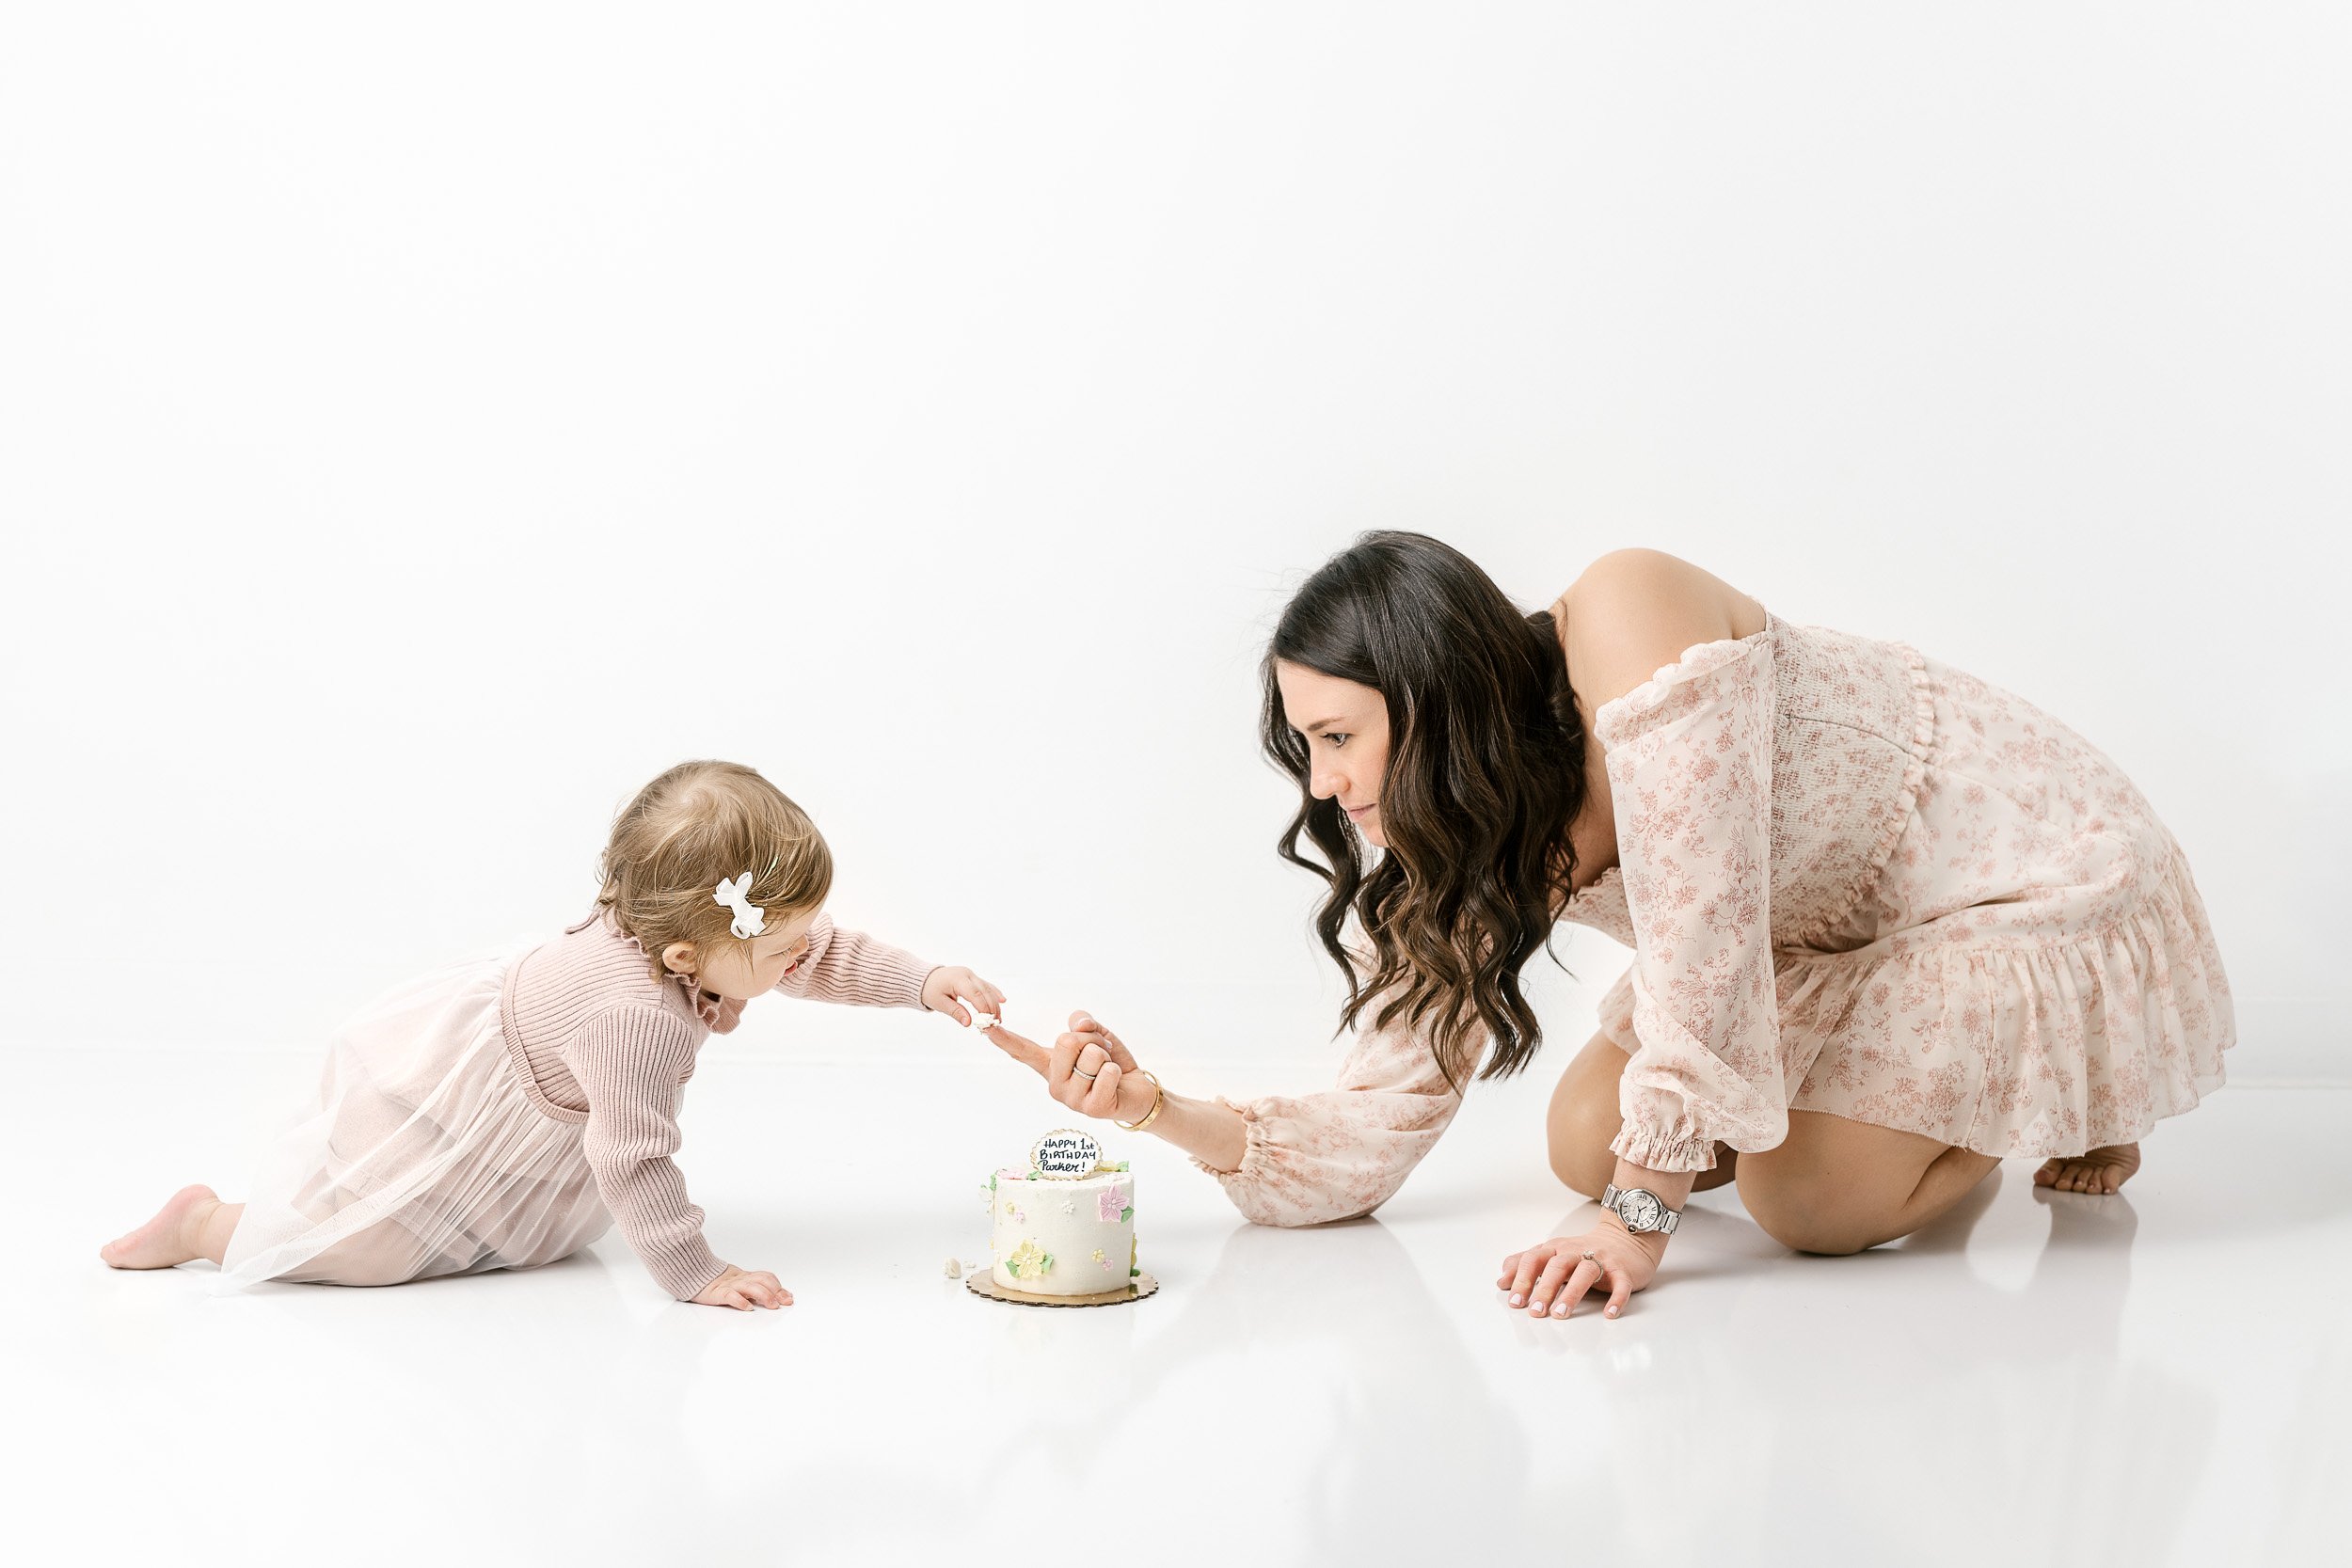  A mother helps her baby girl try her birthday cake during a baby portrait session by Nicole Hawkins Photography. sharing cake #NicoleHawkinsPhotography #NicoleHawkinsBabies #studiochildren #firstbirthday #studiophotography #girlsbirthdayportraits 